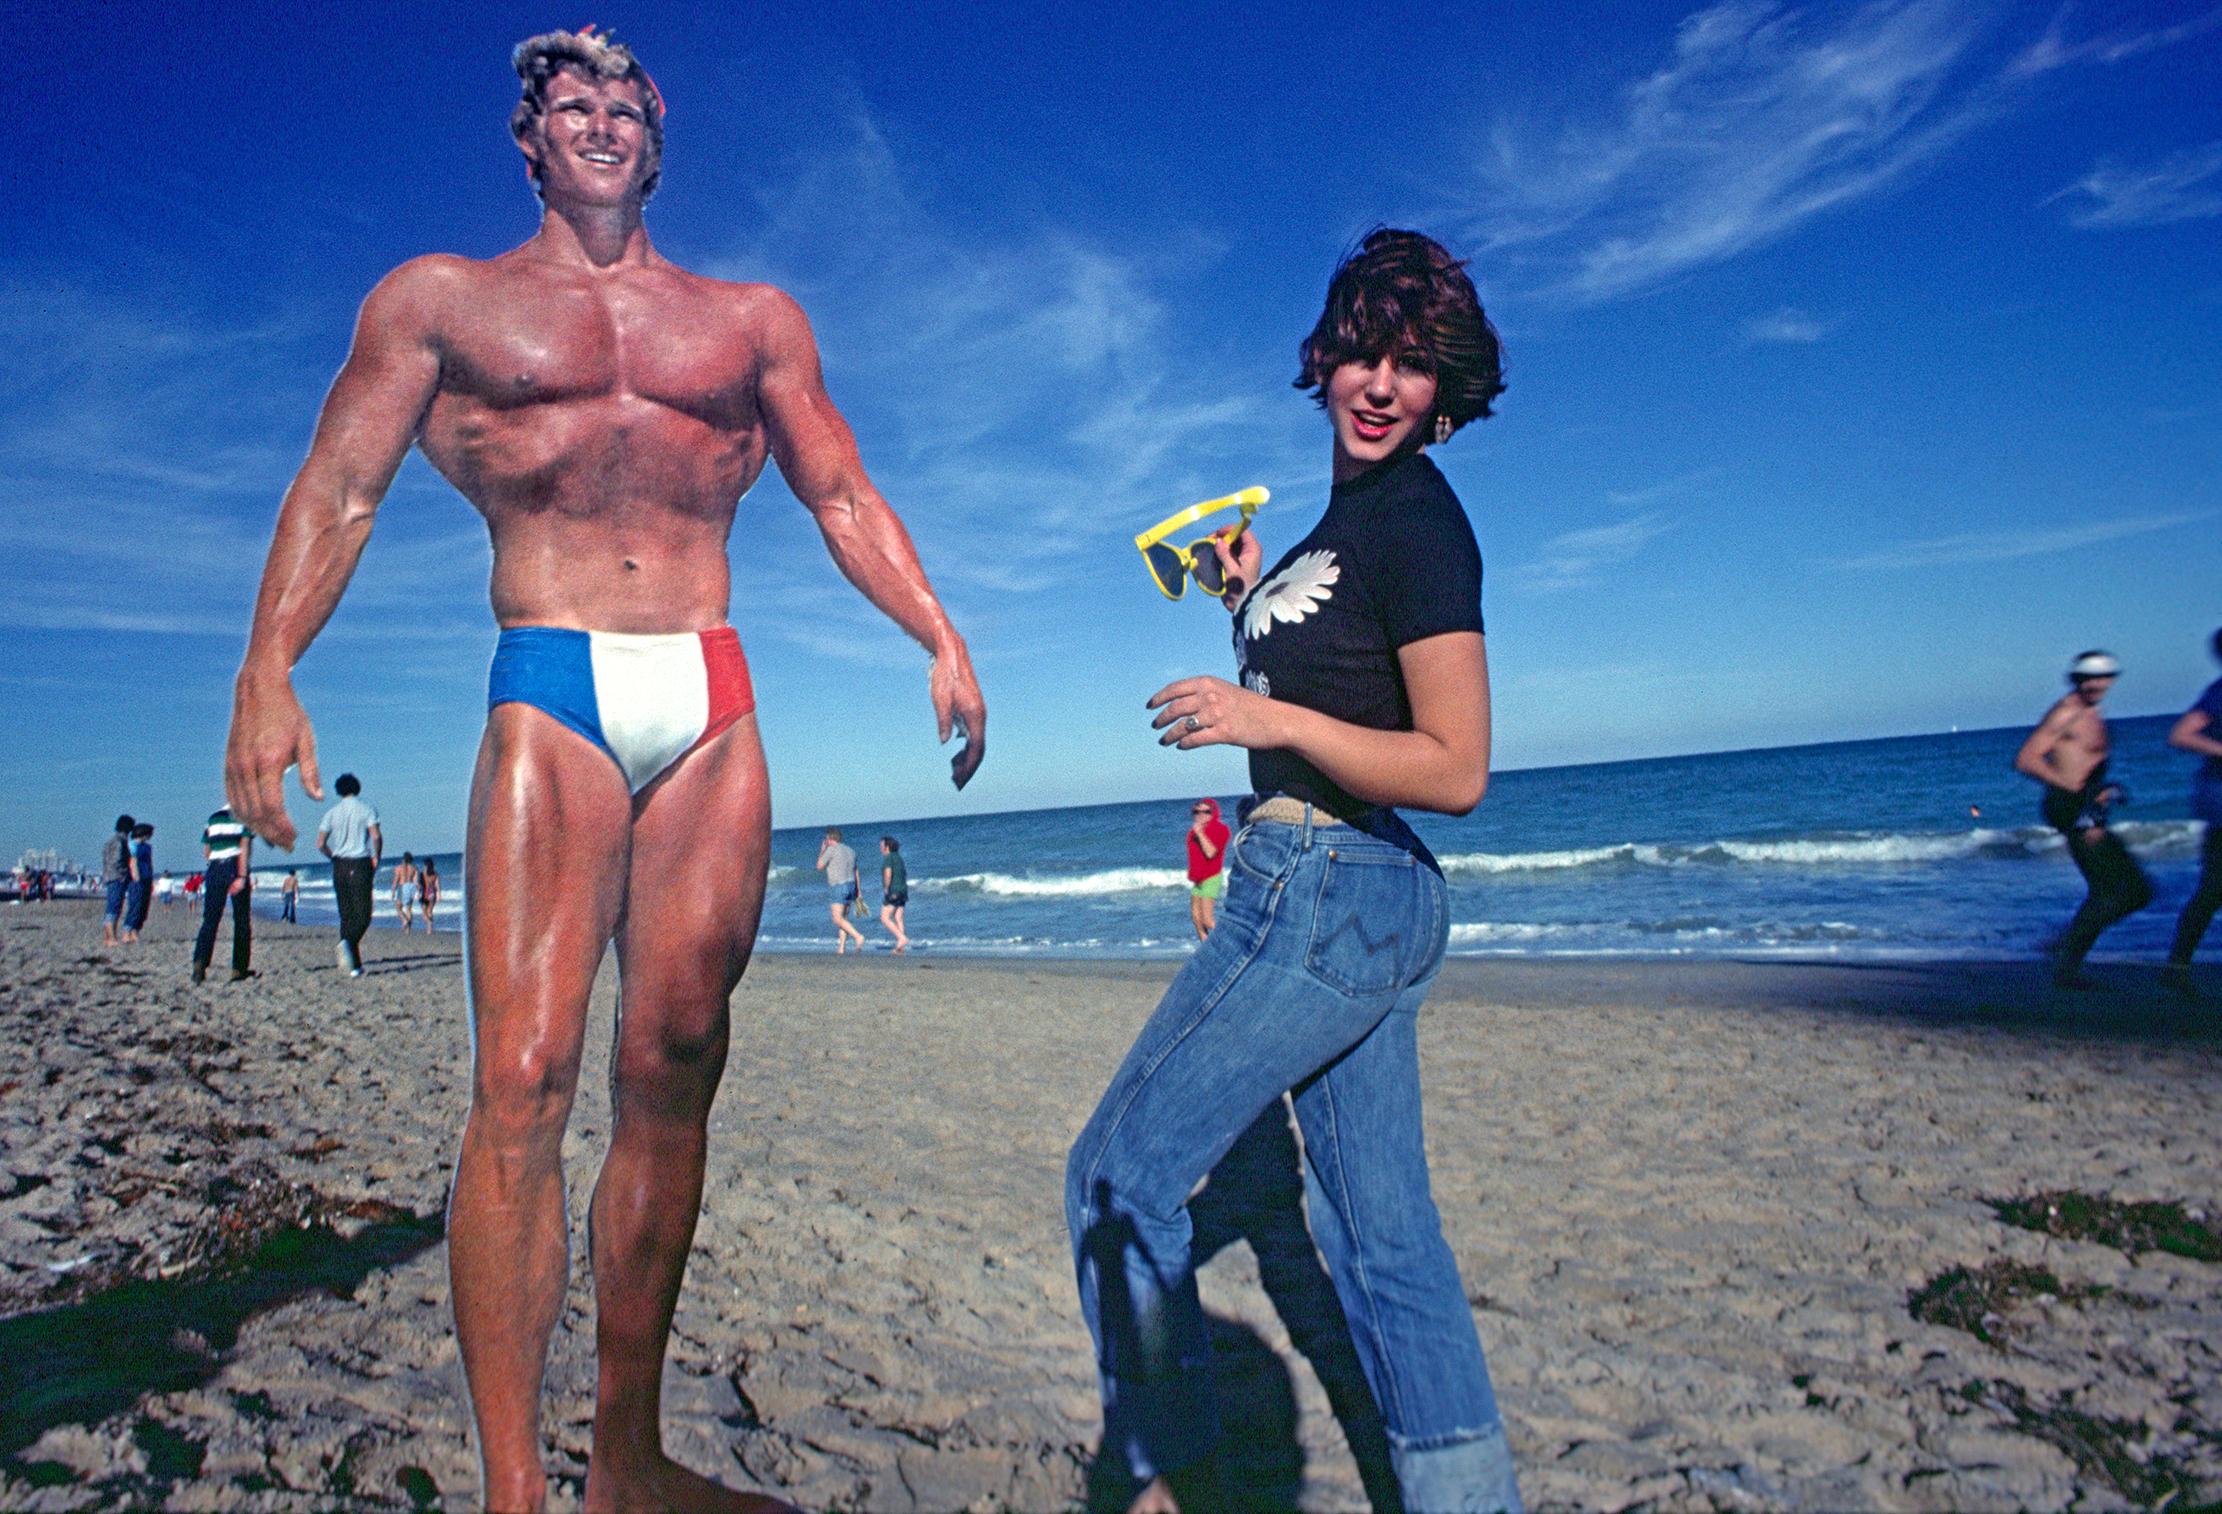 Muscle Man and Female Admirer at the Beach - Photographie mise en scène 